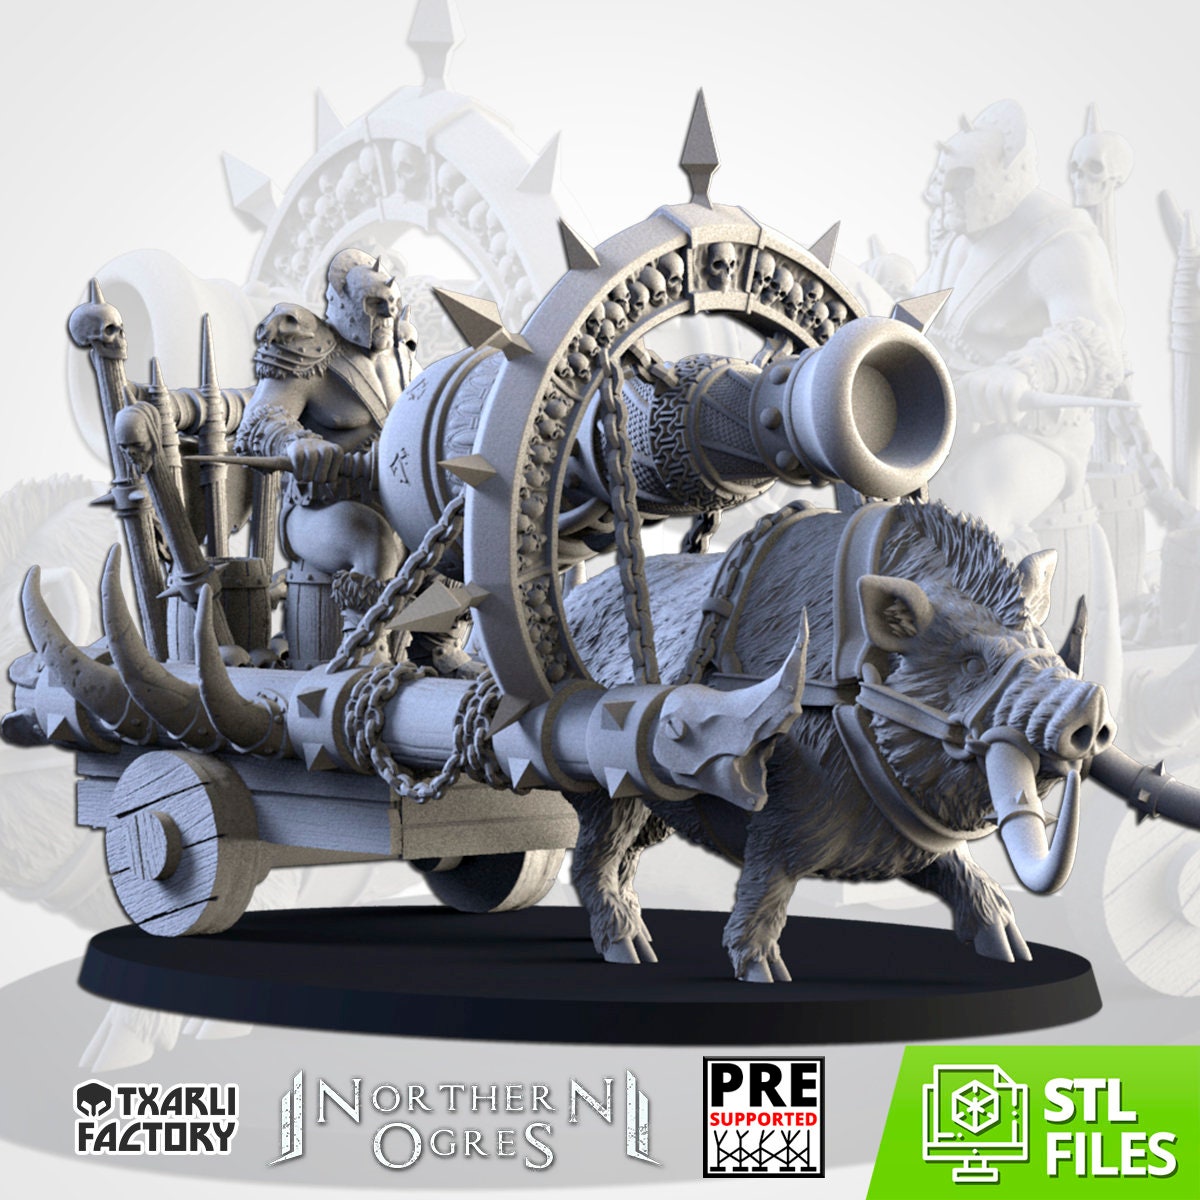 Northern Ogres - Thunder Cannon by Txarli Factory